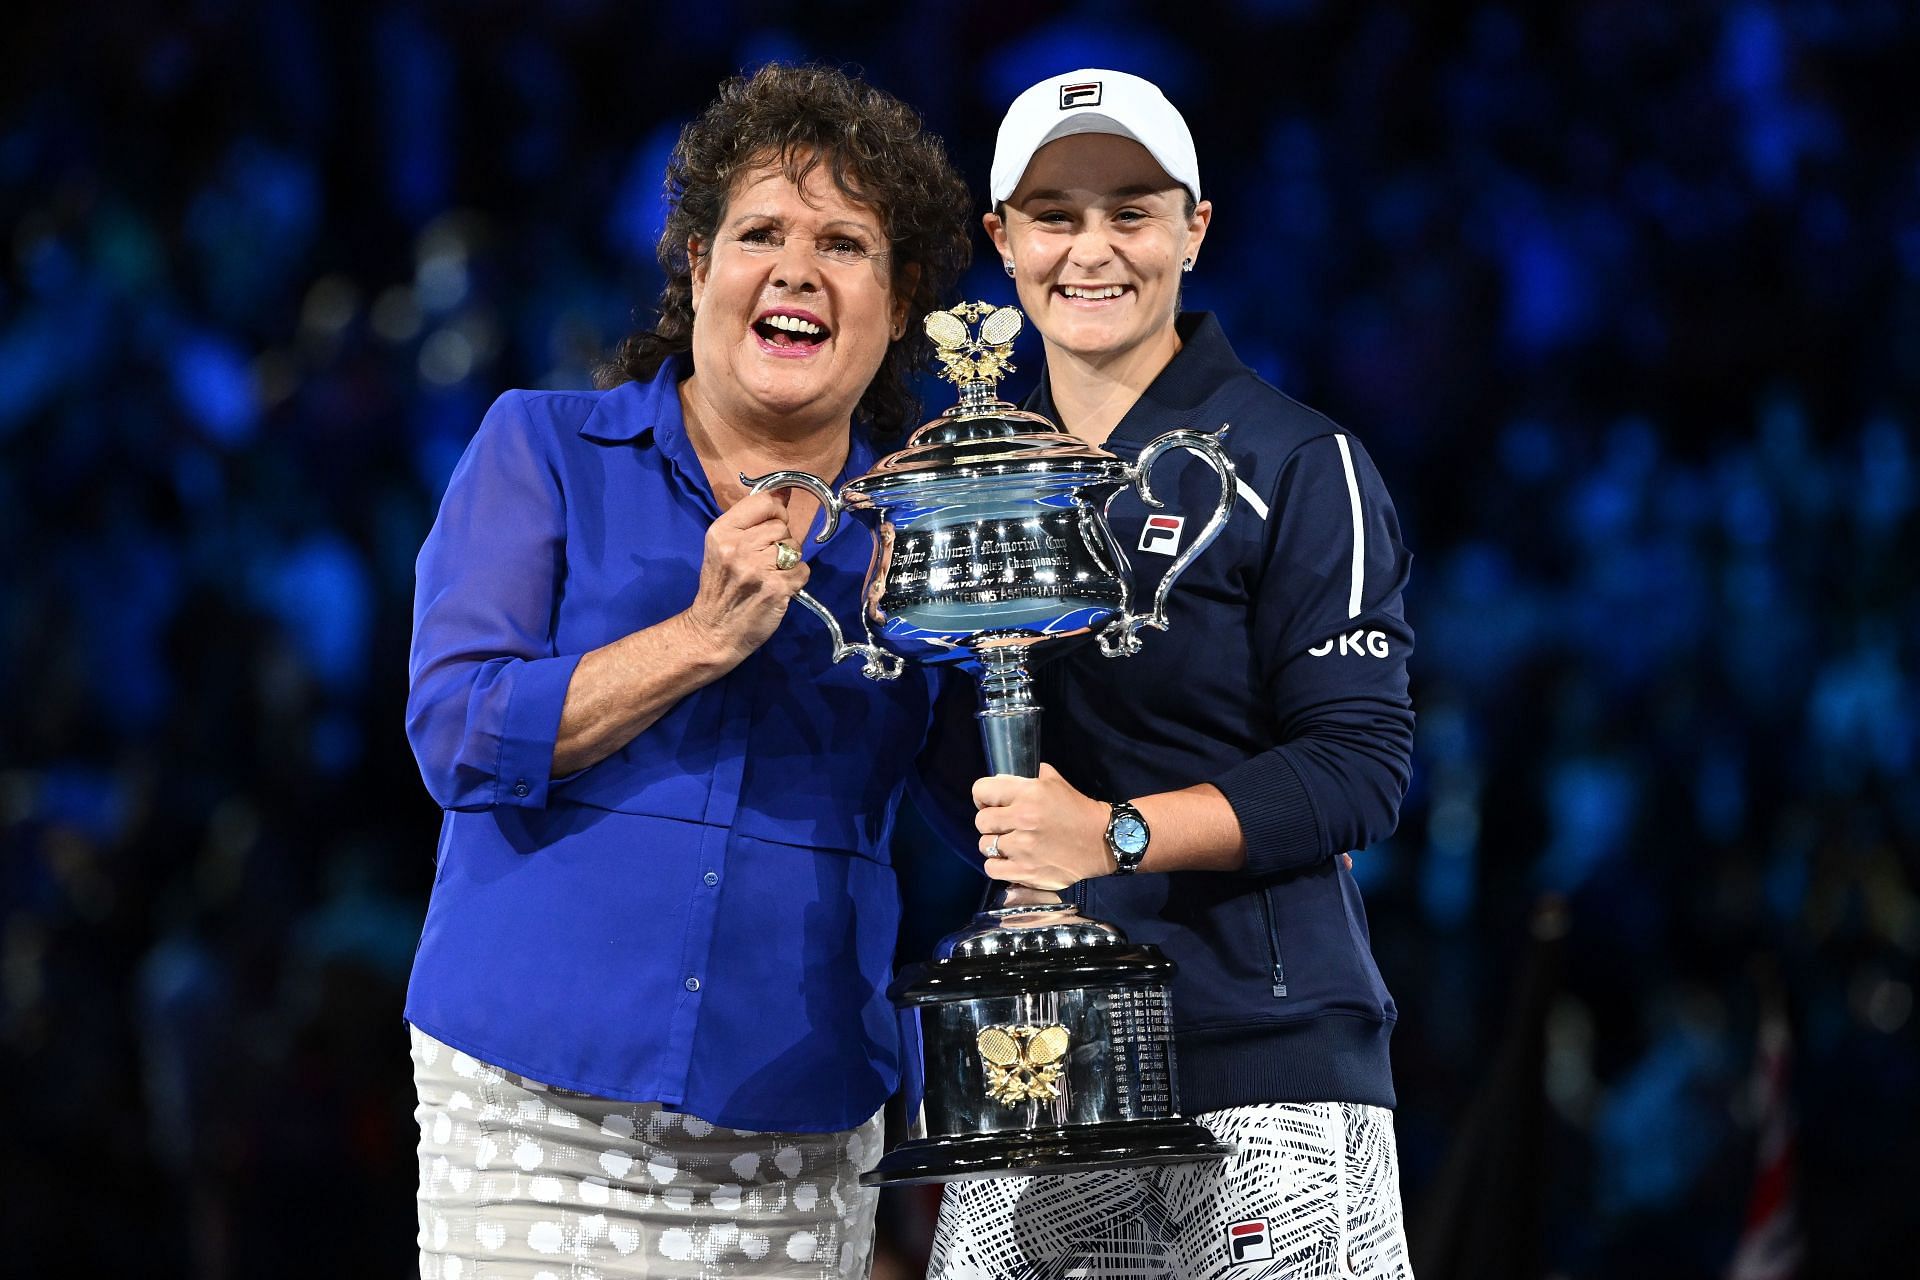 Ashleigh Barty&#039;s day was made even more special by receiving the trophy from Evonne Goolagong Cawley